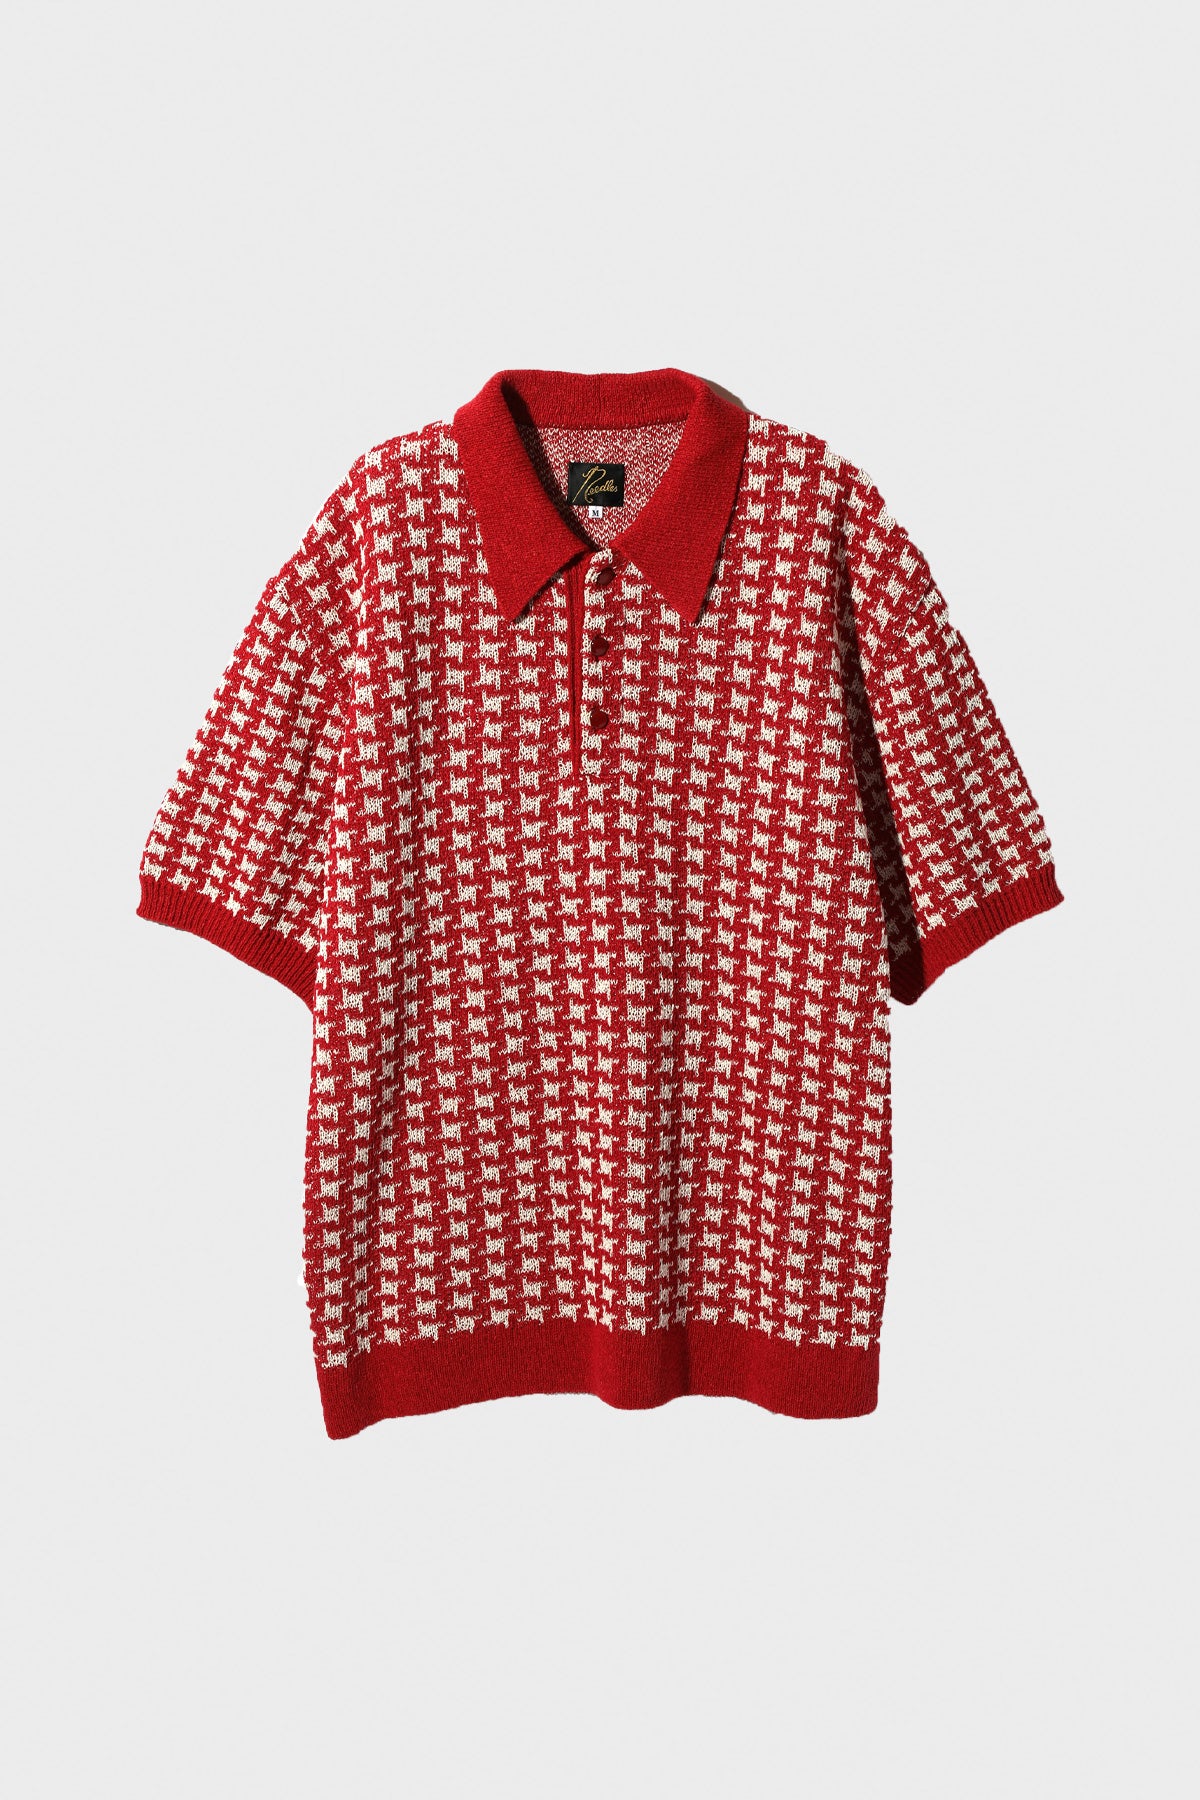 Needles - Houndstooth Polo Sweater - Red - Canoe Club